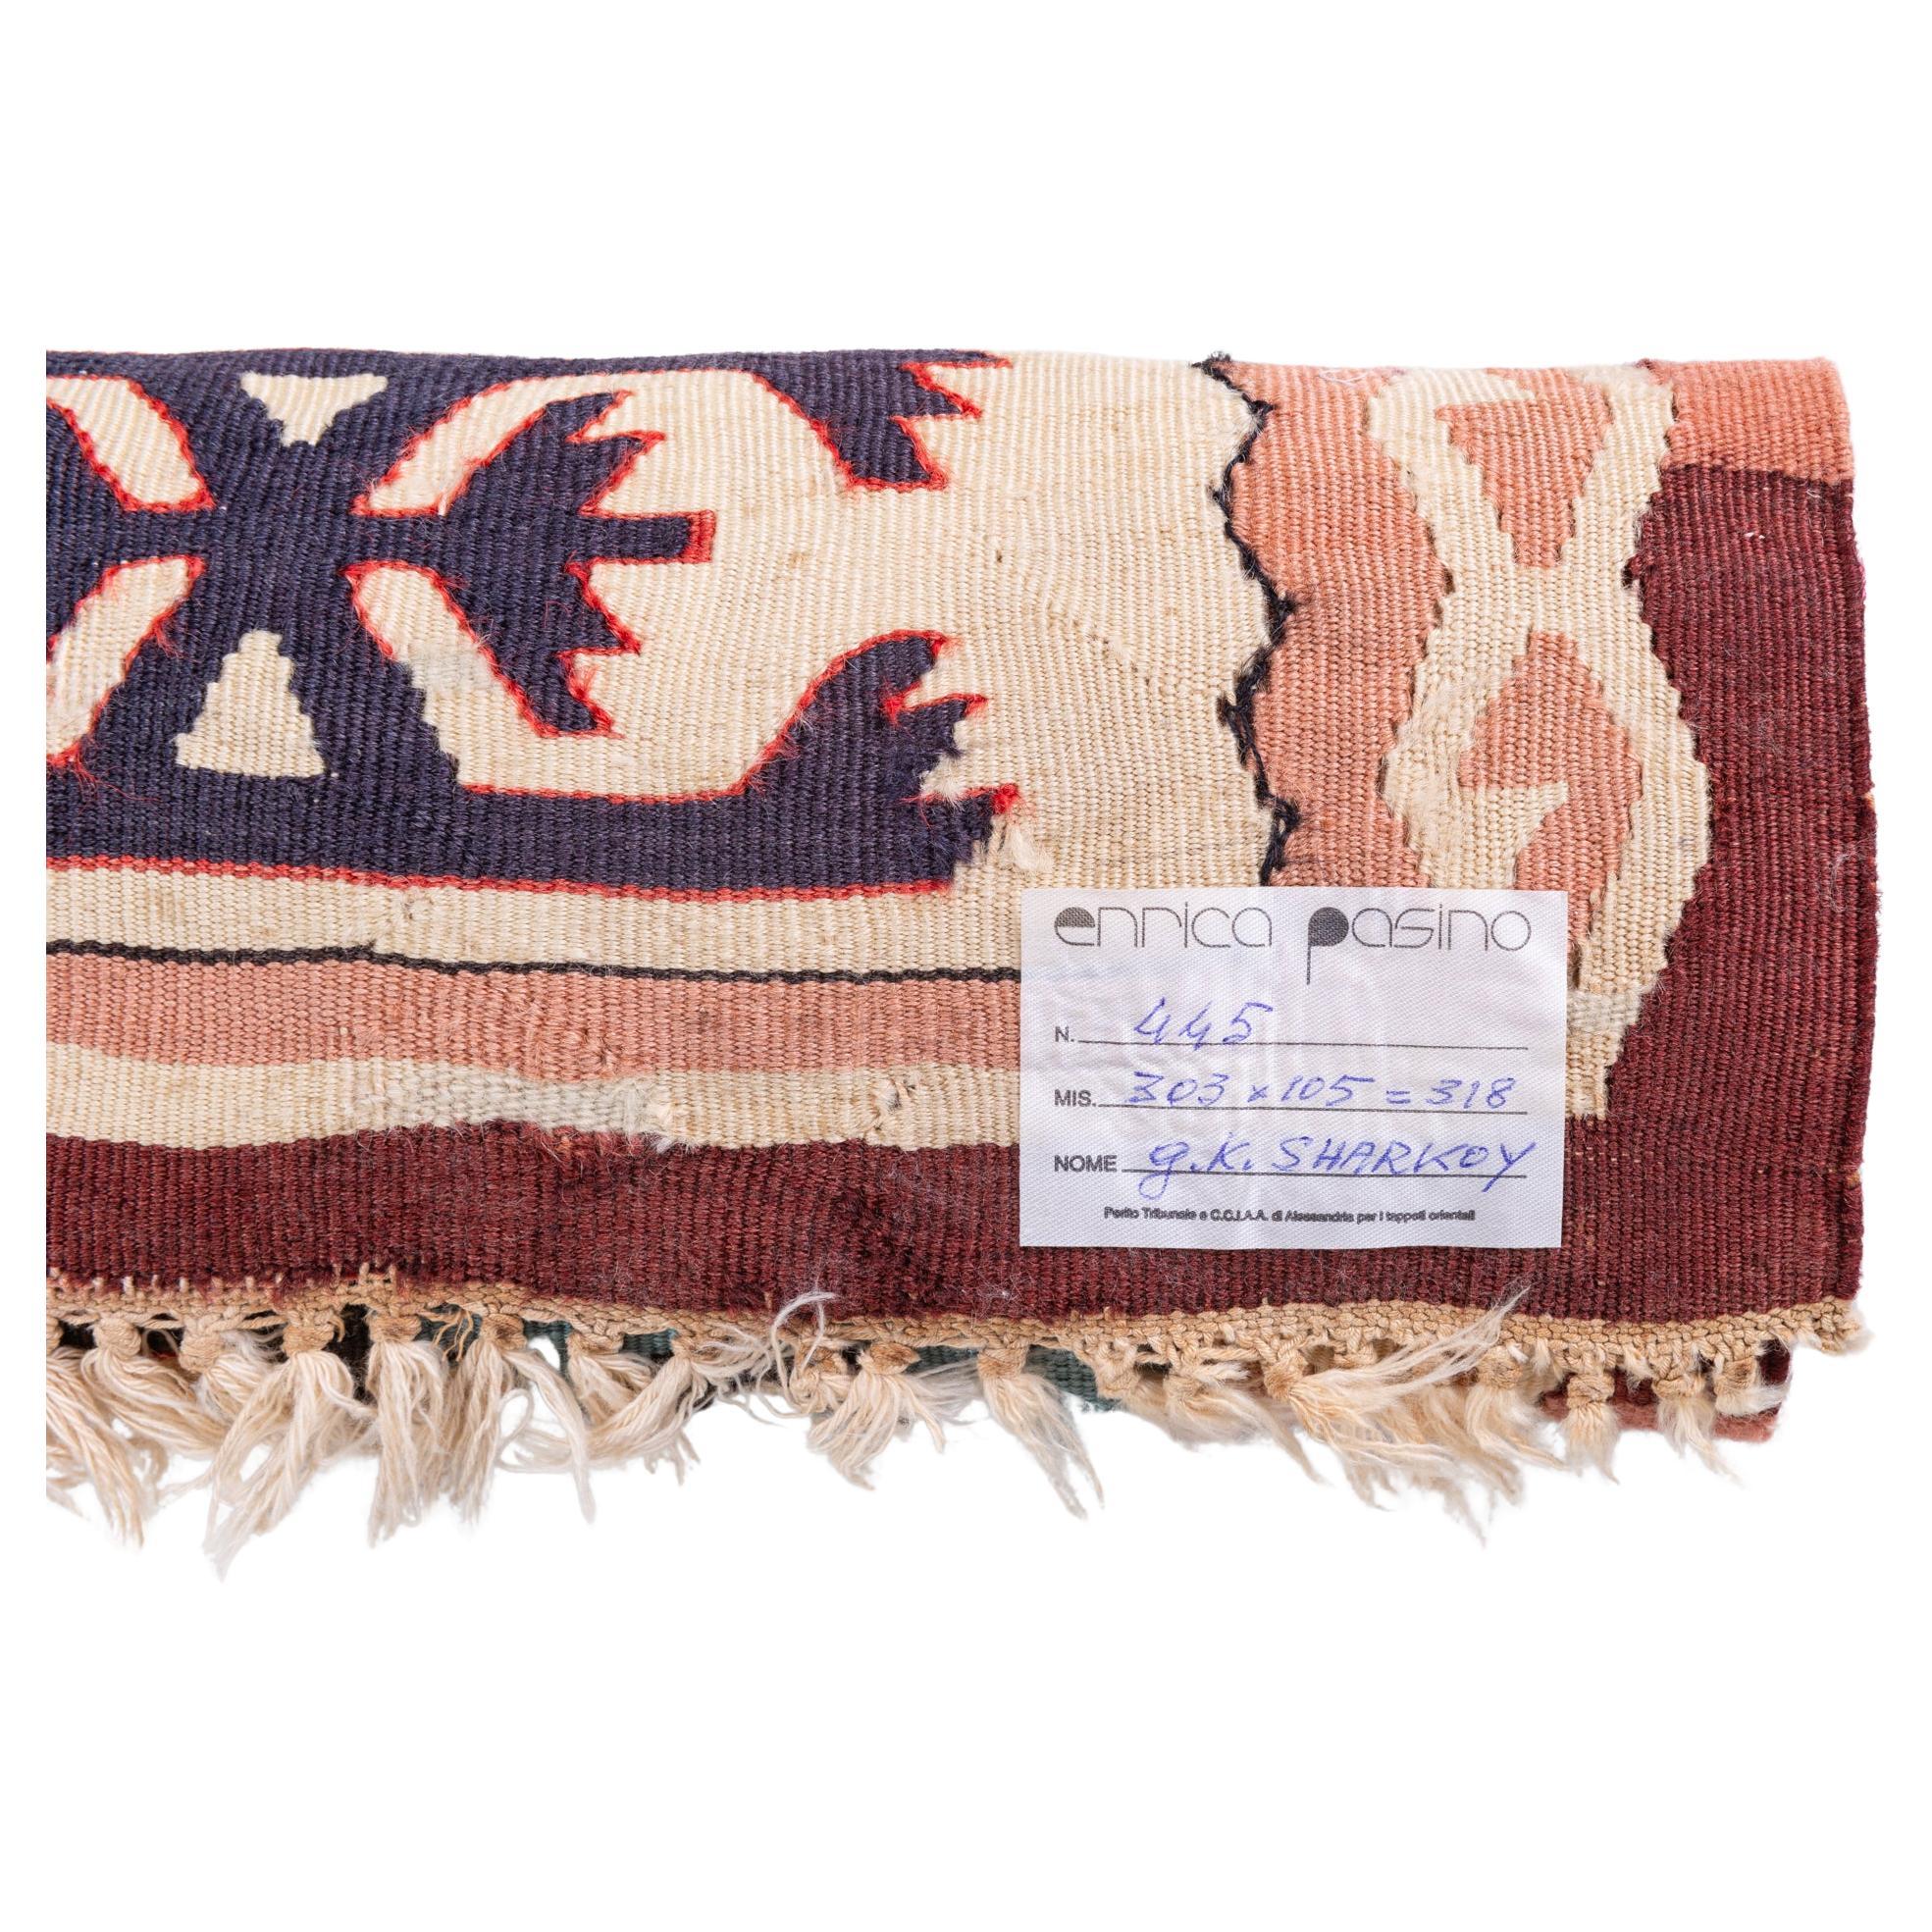 nr. 445 - Pleasant kilim runner, to set everywhere: sleeping room, in front of the library...  It can be combined with a similar one published on 1stdibs LU1379228106402. Special price for two.
 
